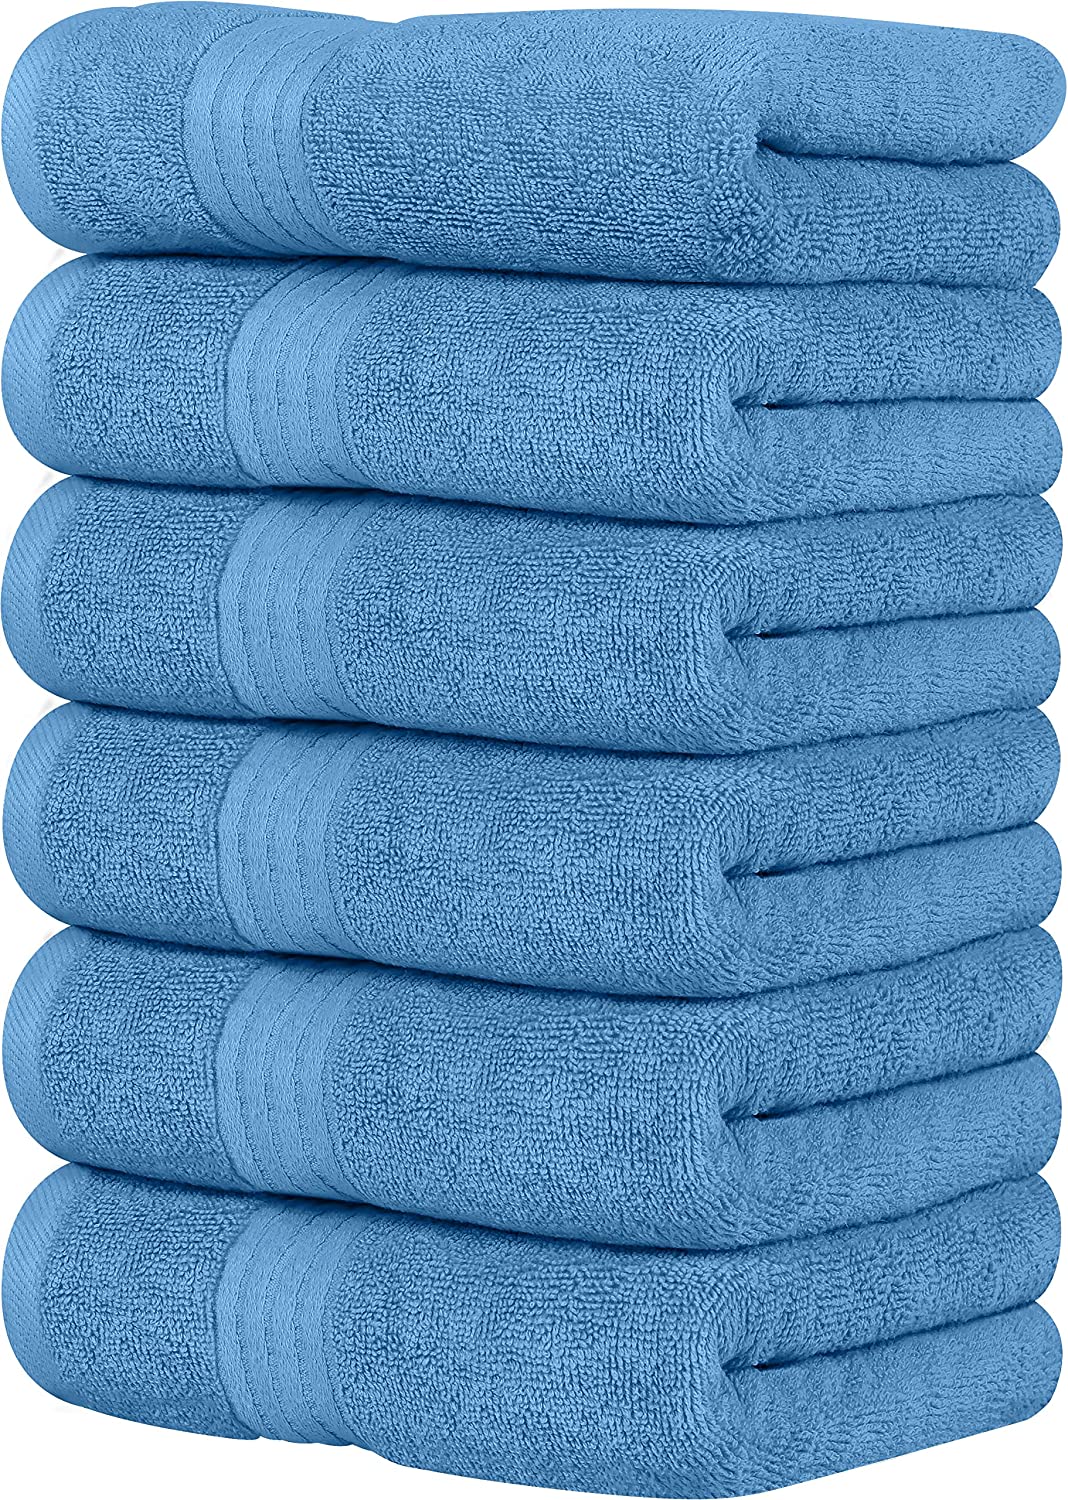 Utopia Towels 6 Piece Luxury Hand Towels Set, (16 x 28 inches